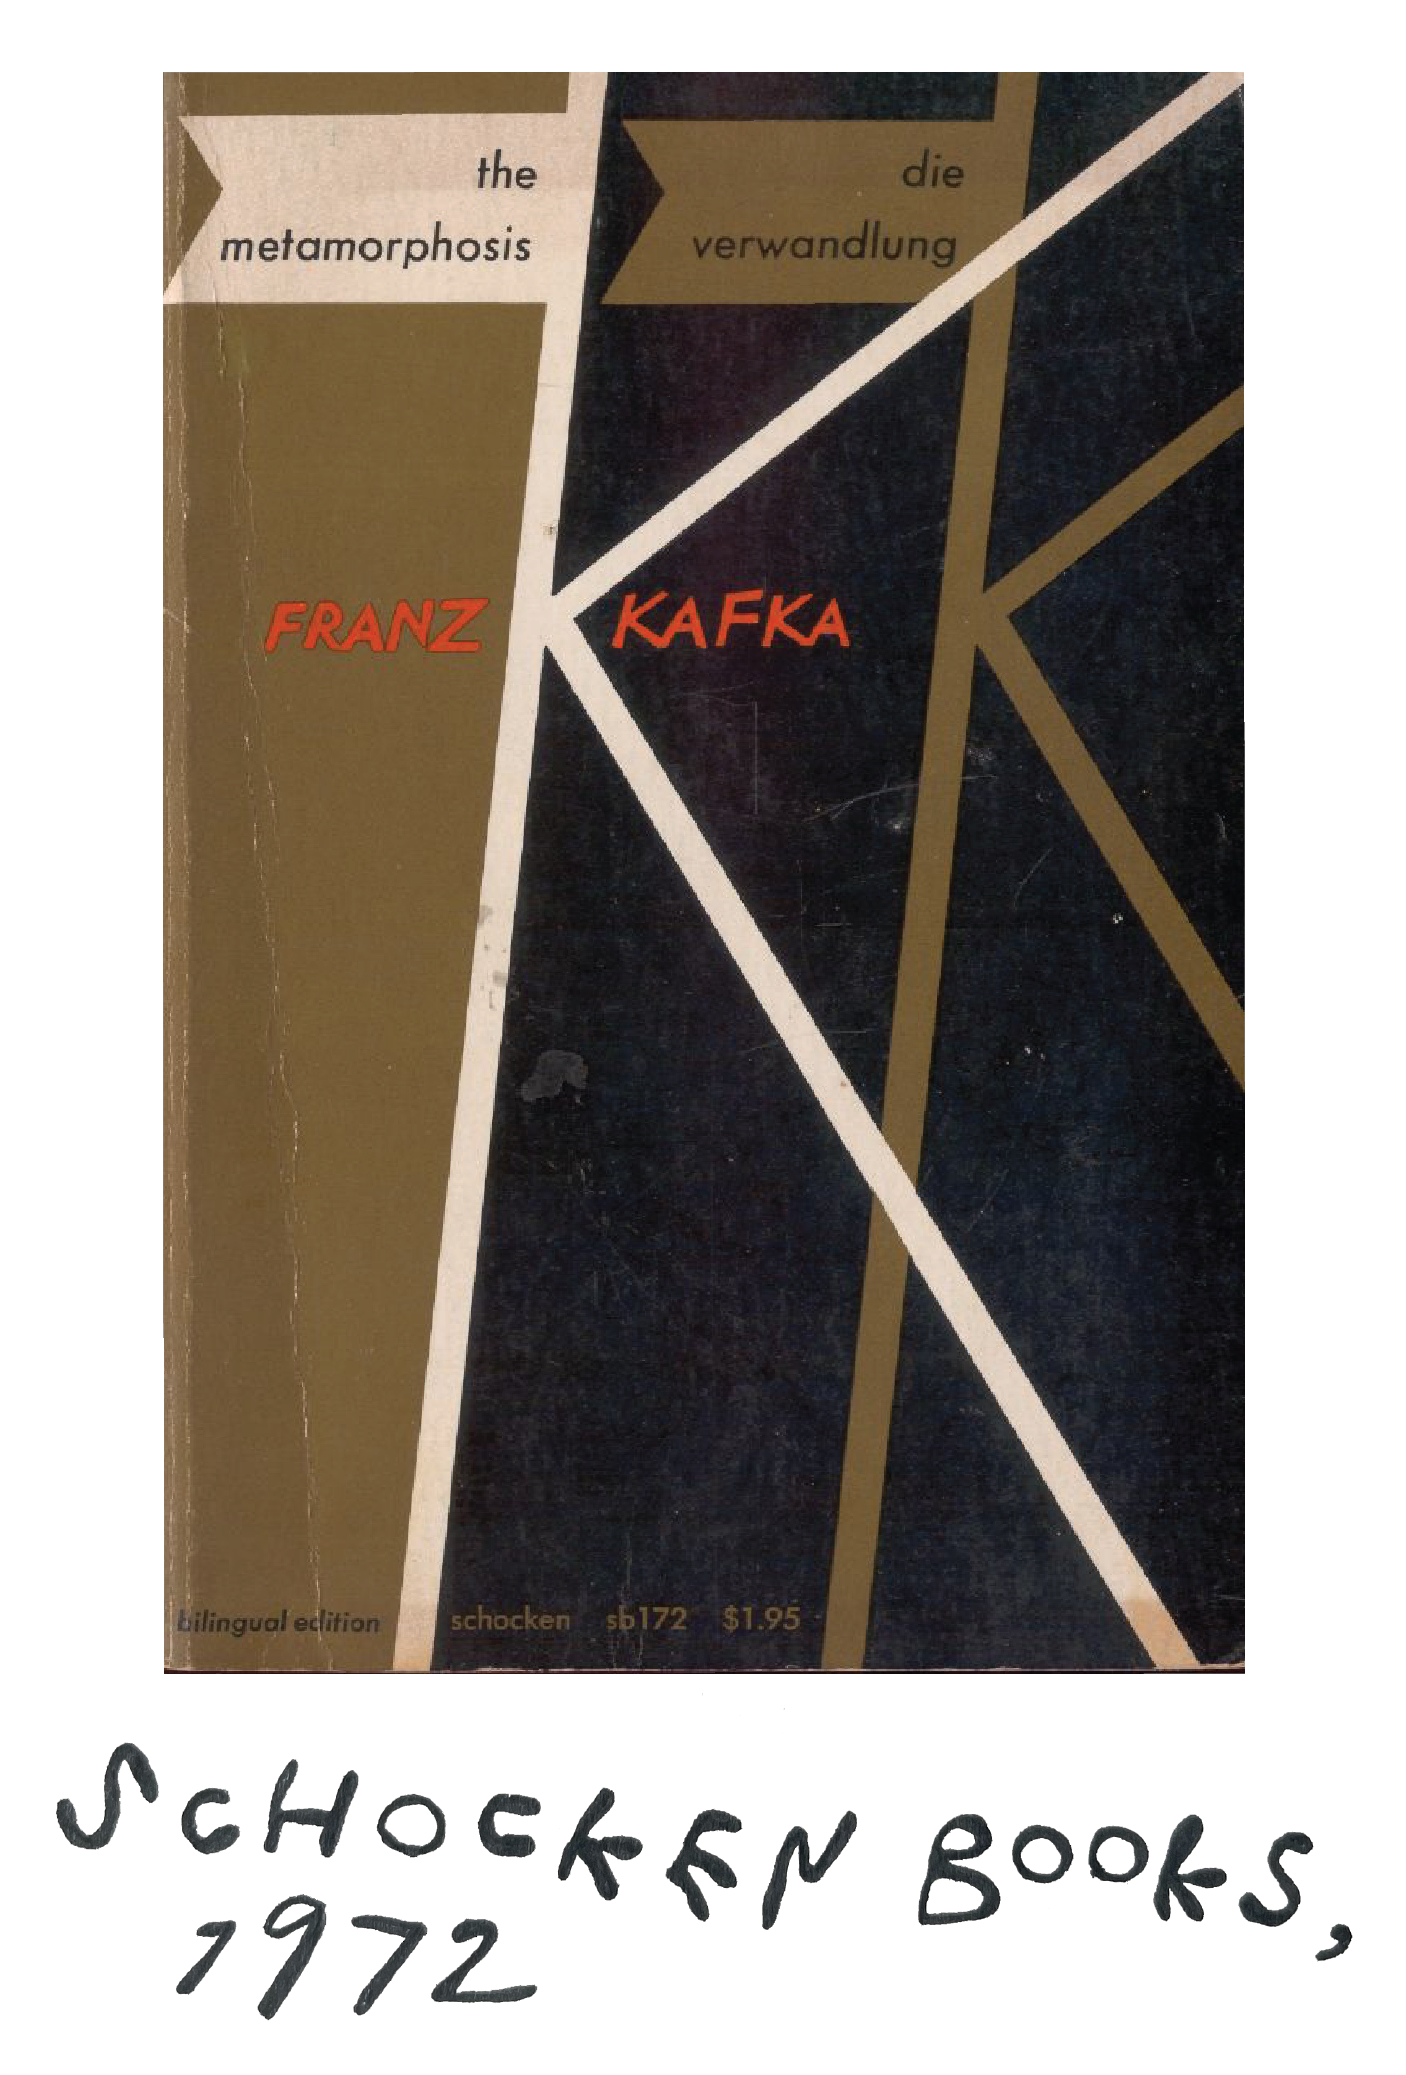 A worn cover with a big, thin "K" that divides up the cover in different brown and black section. Kafka's name is written in red in the center of the book. The handwritten caption reads, "Schocken Books, 1972."